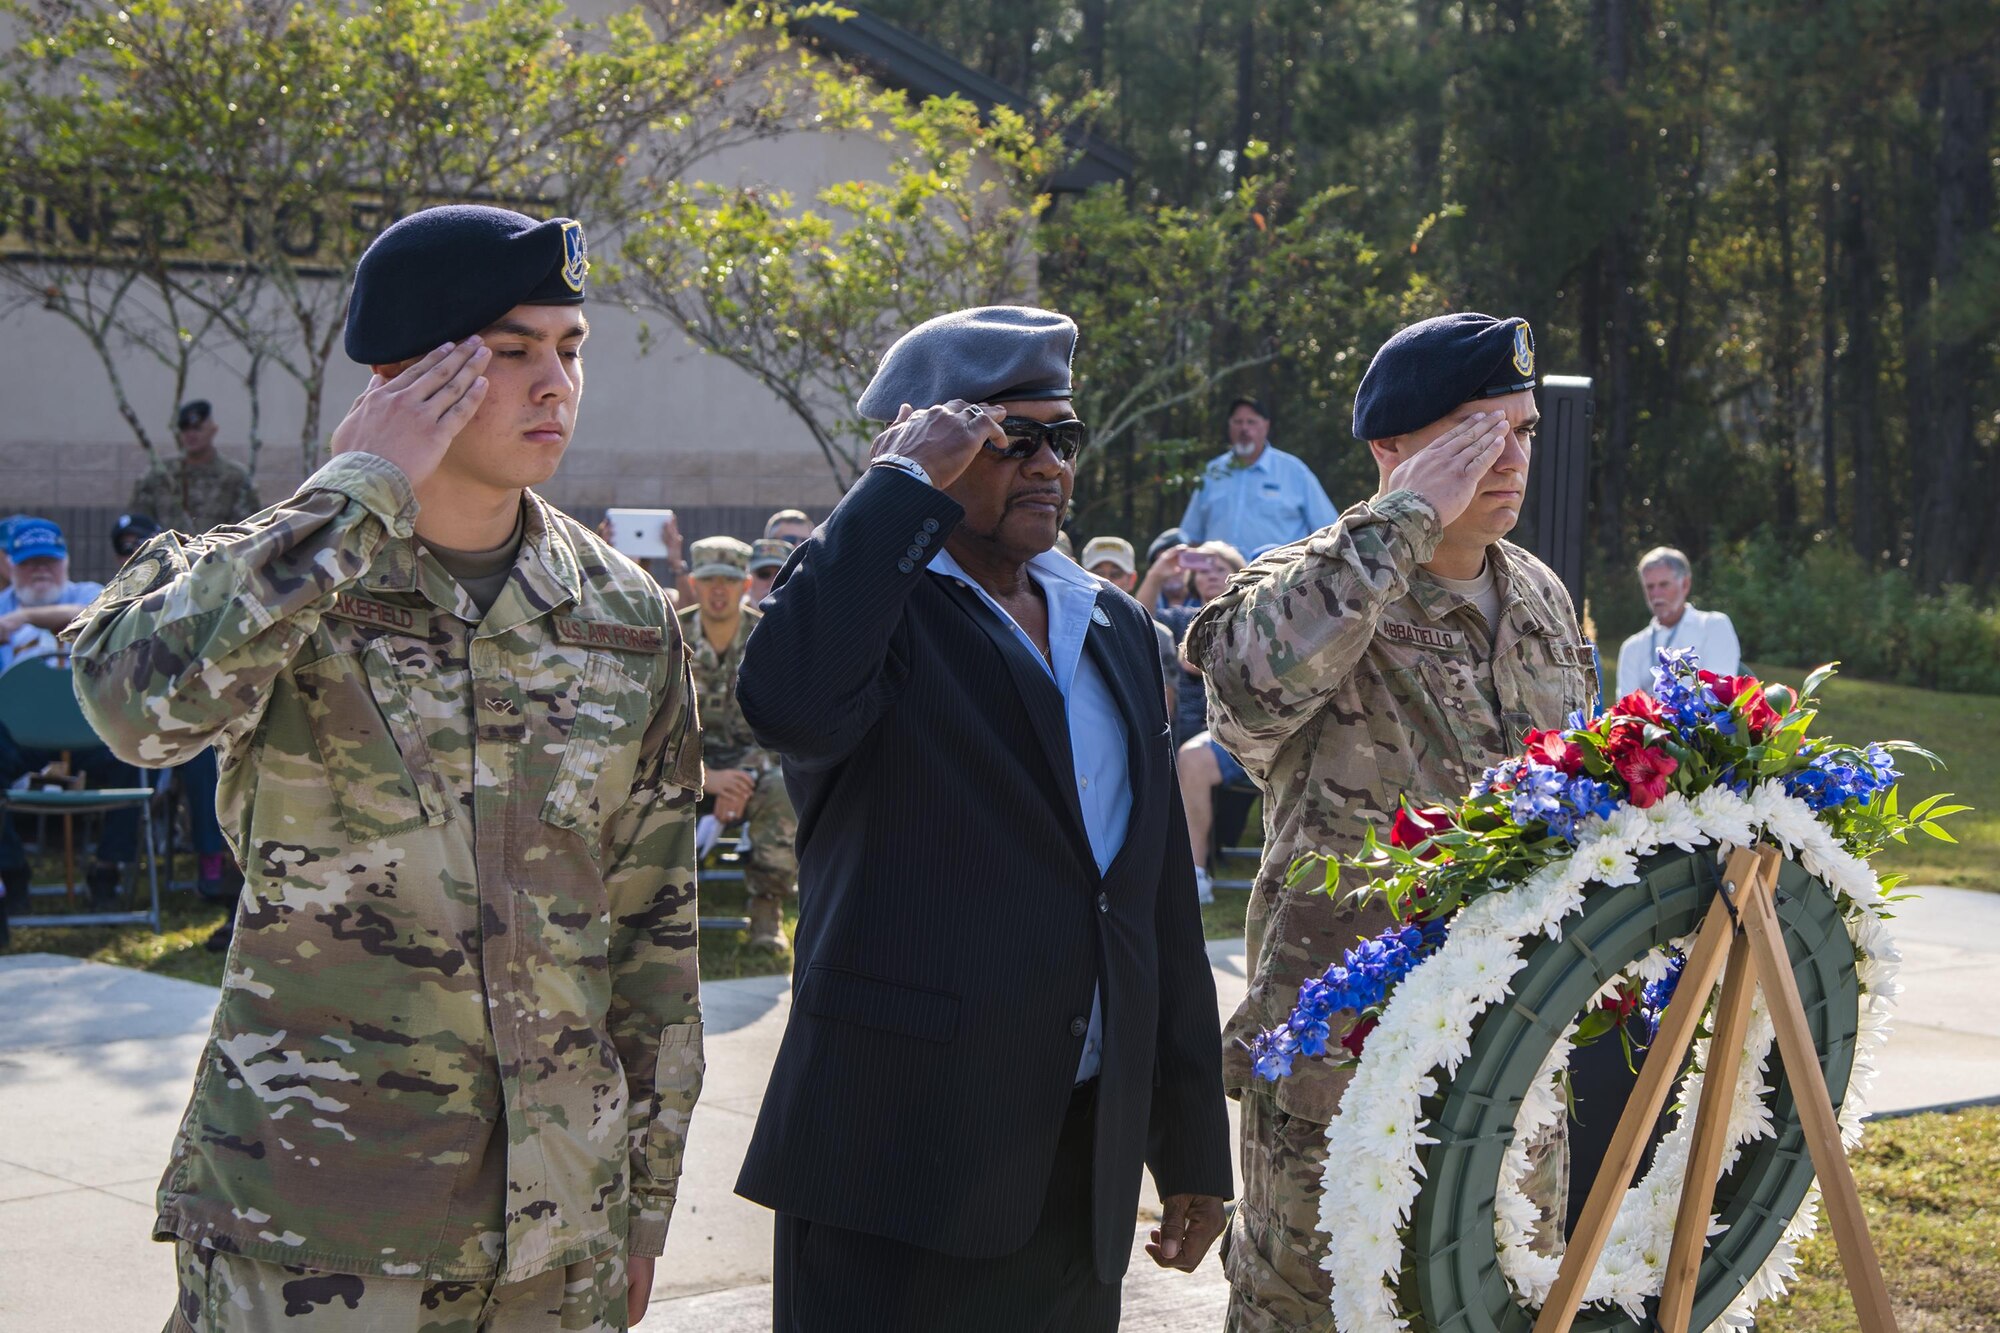 Members of the Safeside Association and 820th Base Defense Group, render a salute during a Safeside reunion memorial, Nov.8, 2017, at Moody Air Force Base, Ga. Biennially, the Safeside Association holds a reunion to interact with and honor their past and present comrades from the 820th Base Defense Group. (U.S. Air Force photo by Airman Eugene Oliver)